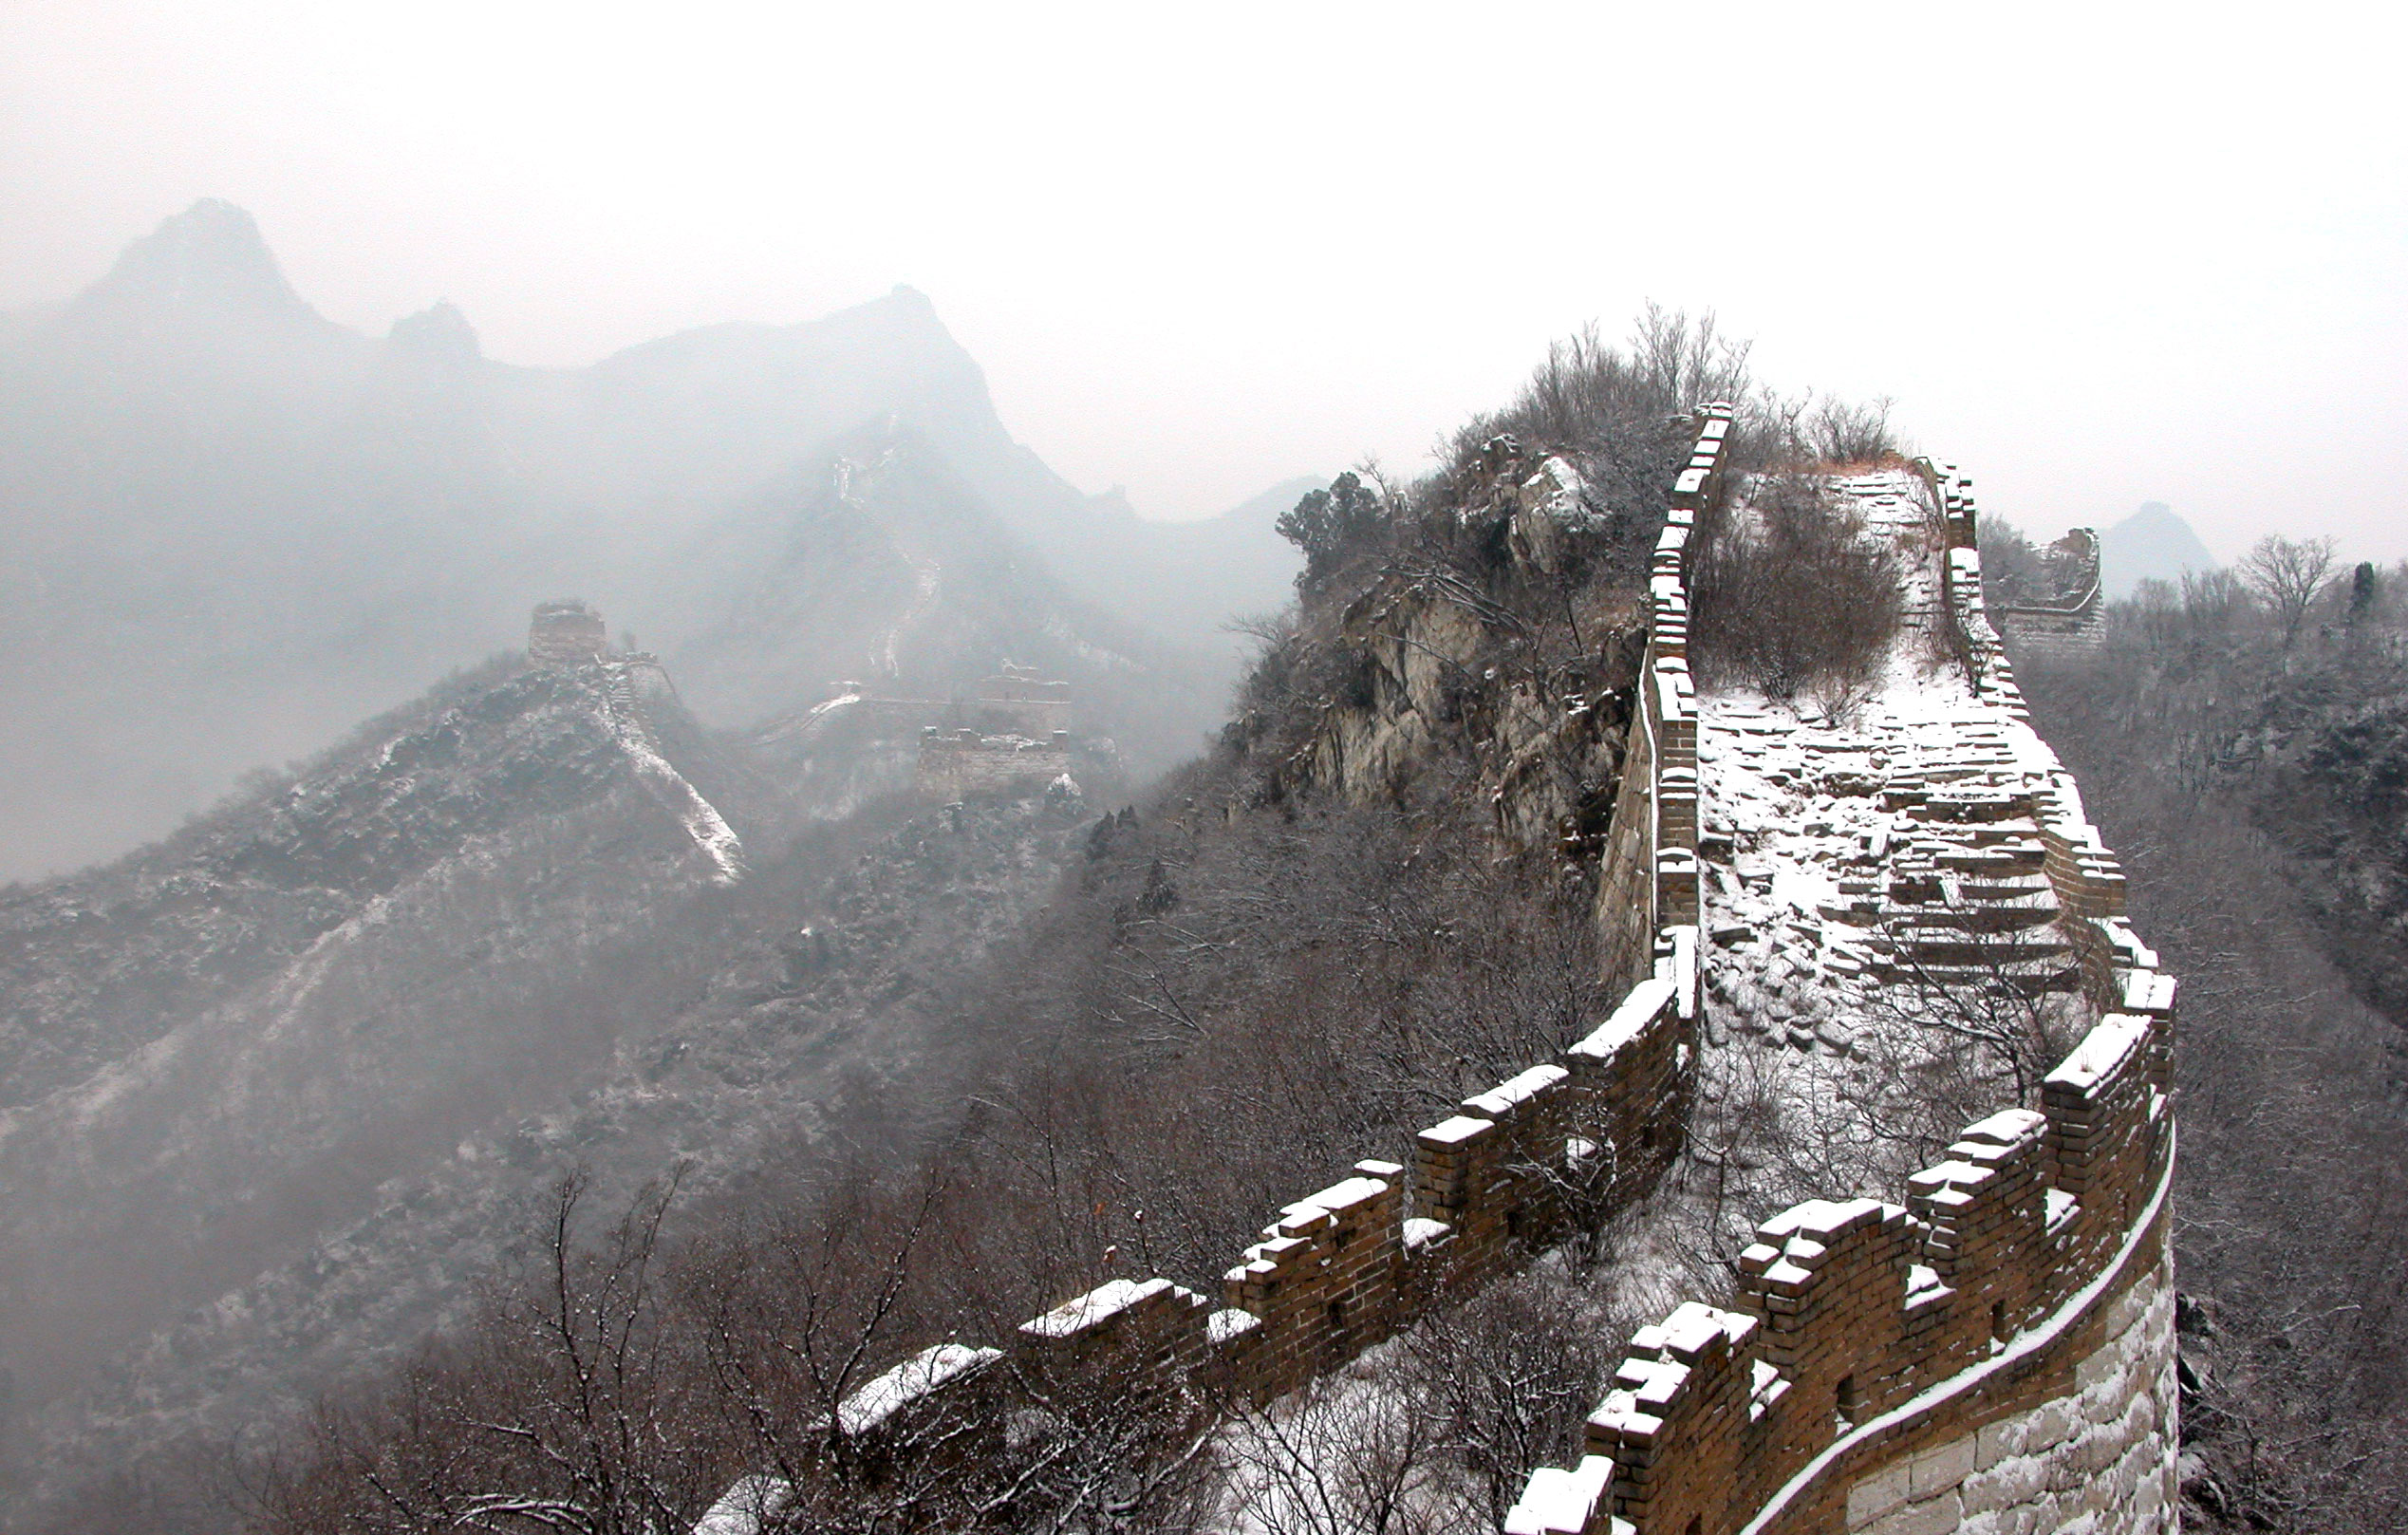 Wall of China, one of the Seven Wonders of the World